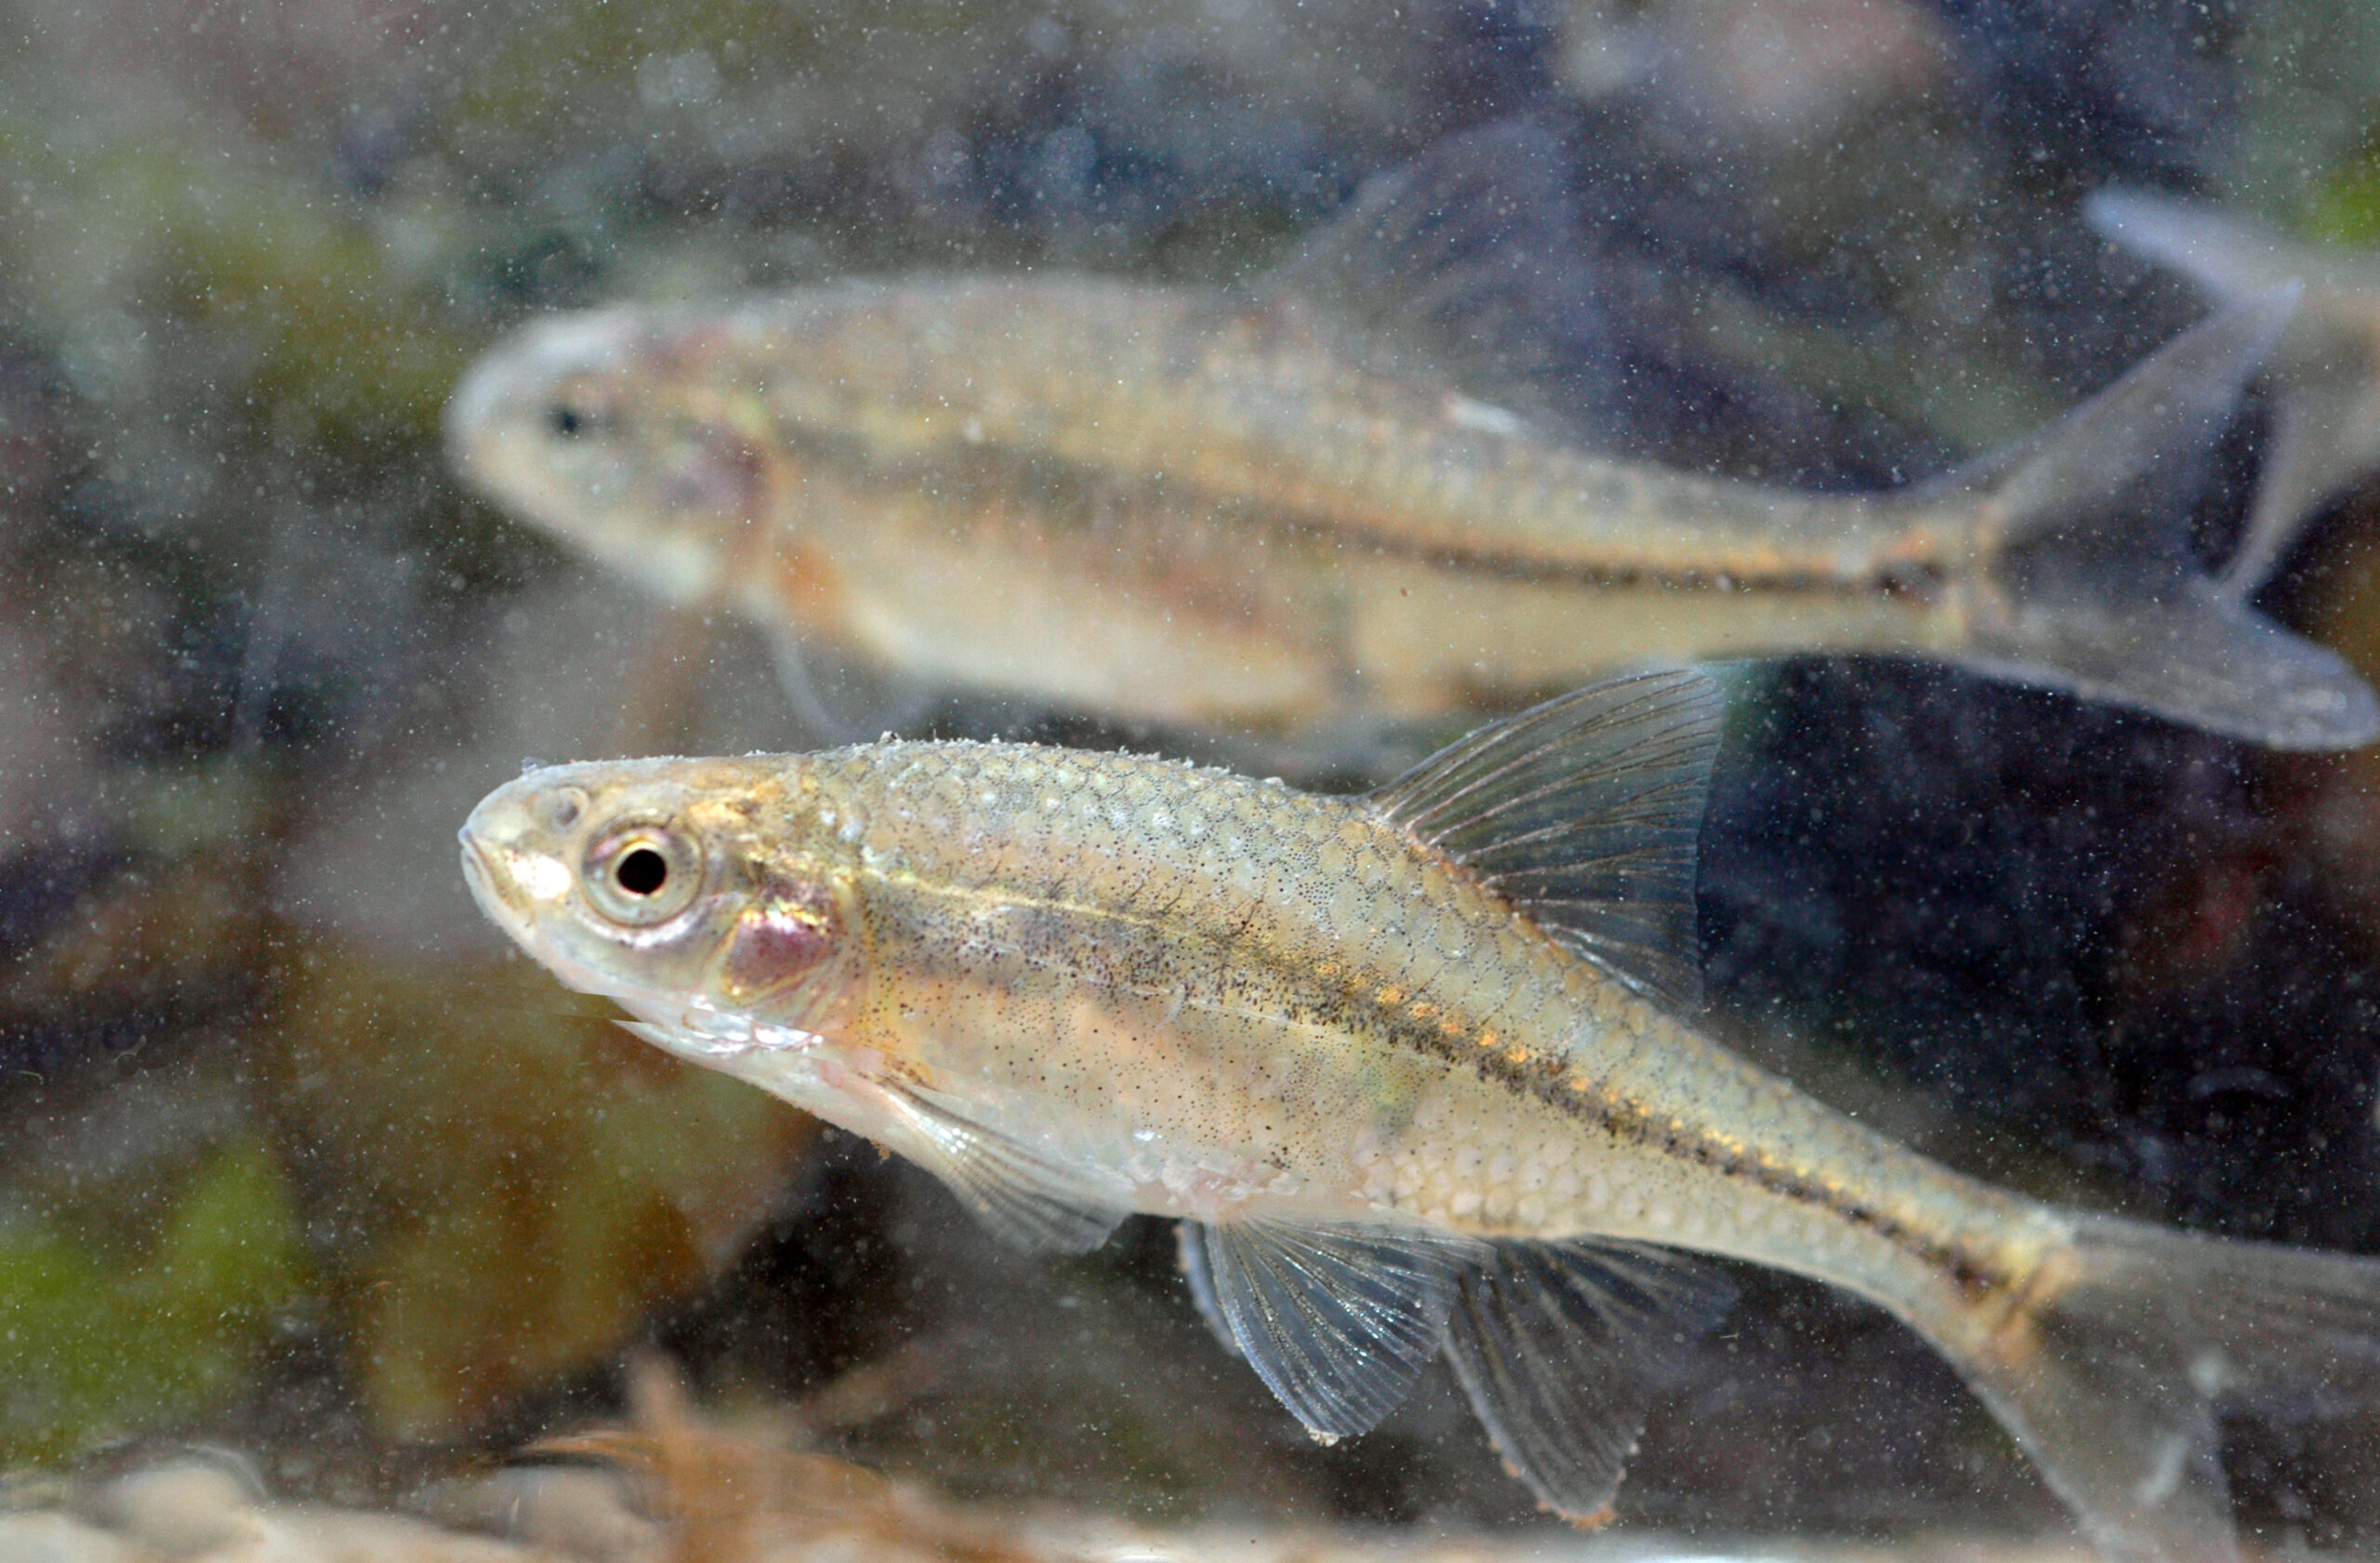 The U.S. Fish and Wildlife Service proposed Tuesday to remove the Oregon chub from its threatened status under the Endangered Species Act.